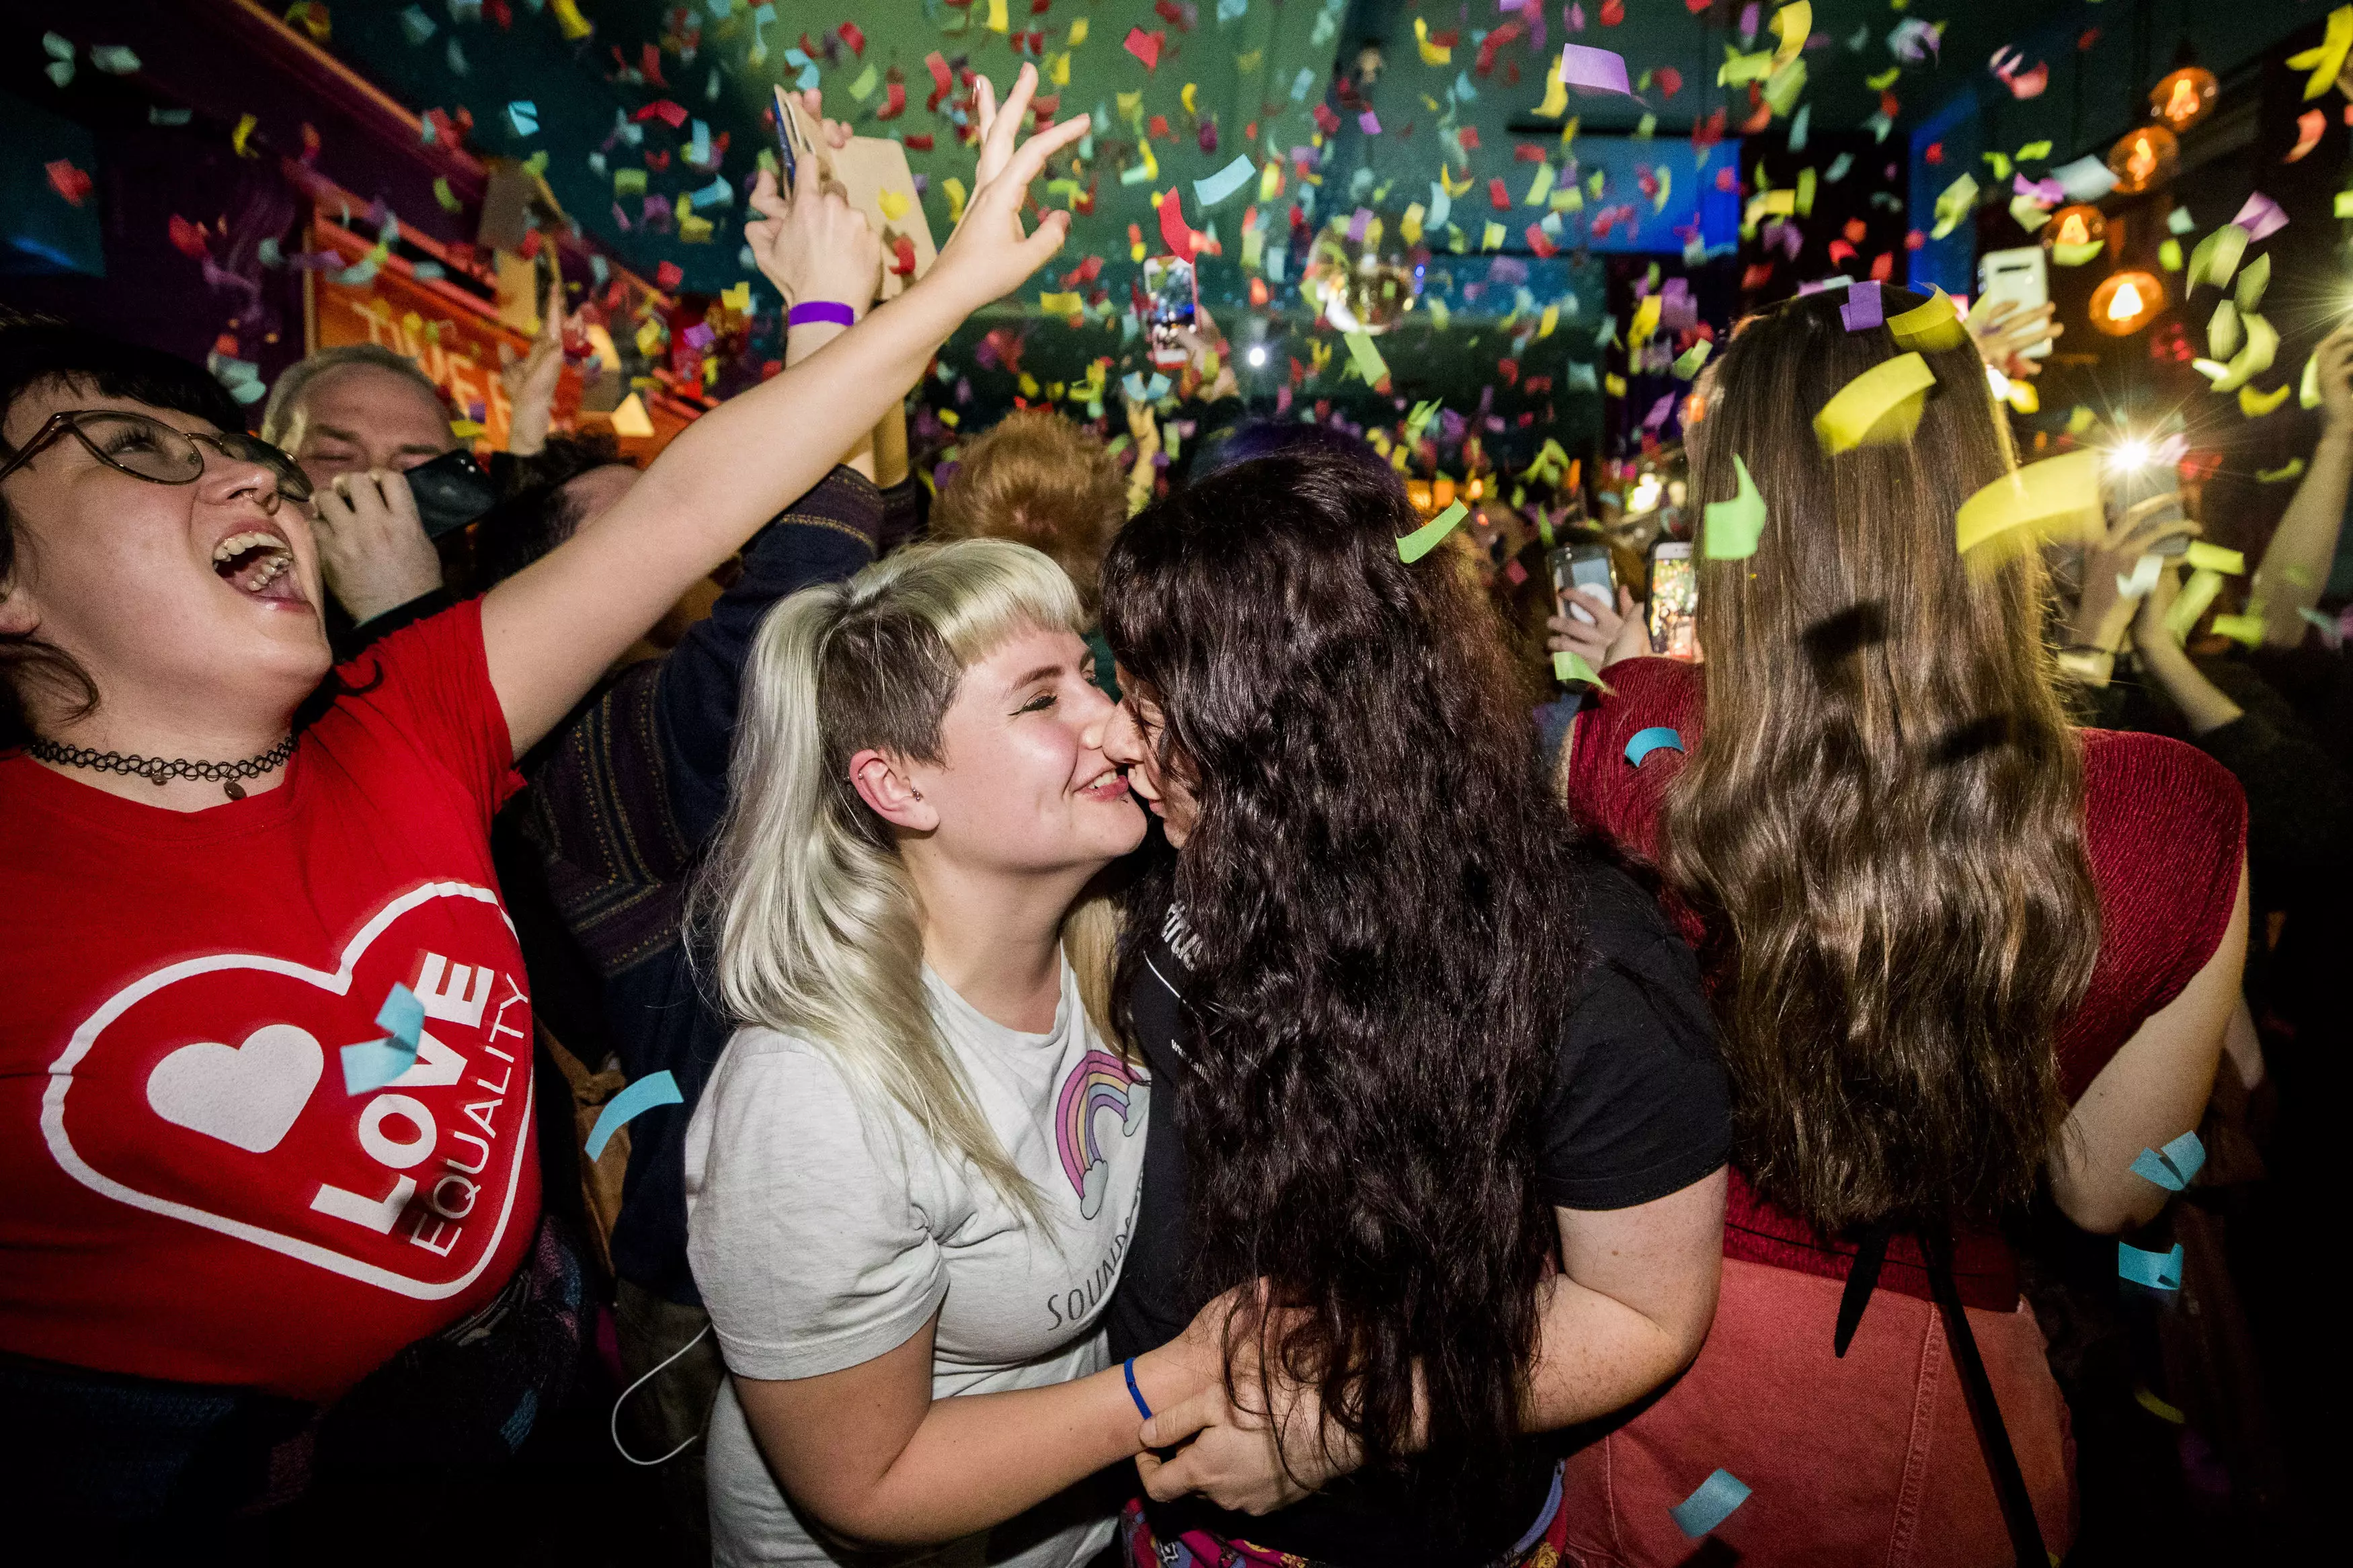 A couple celebrating the legalisation of same sex marriage at midnight in Belfast. (